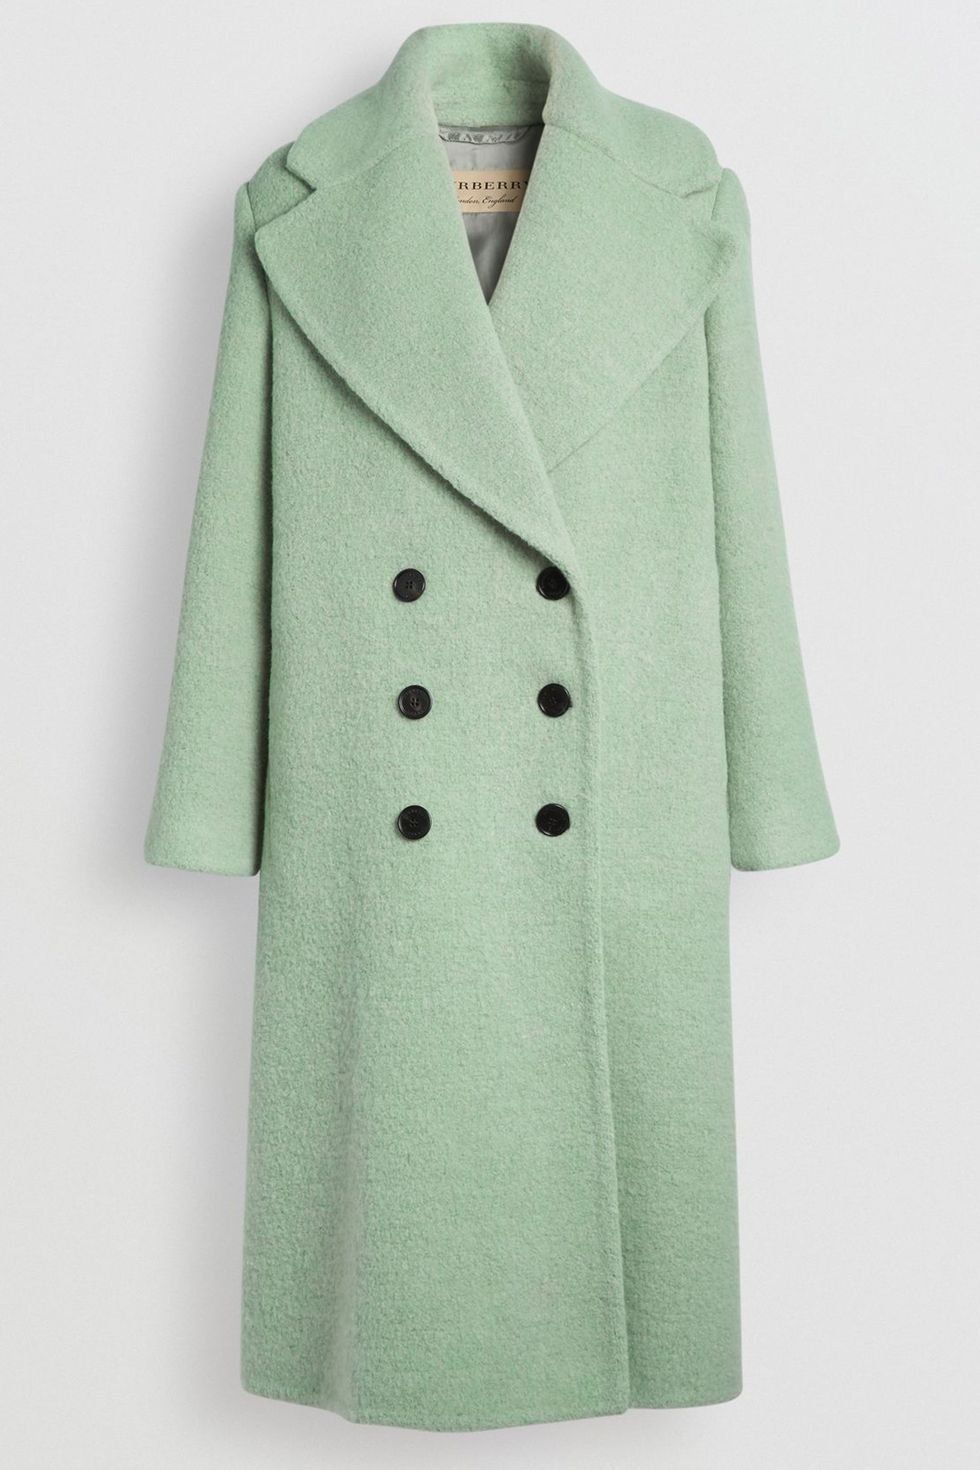 Clothing, Coat, Overcoat, Outerwear, Green, Trench coat, Sleeve, Duster, Robe, Collar, 